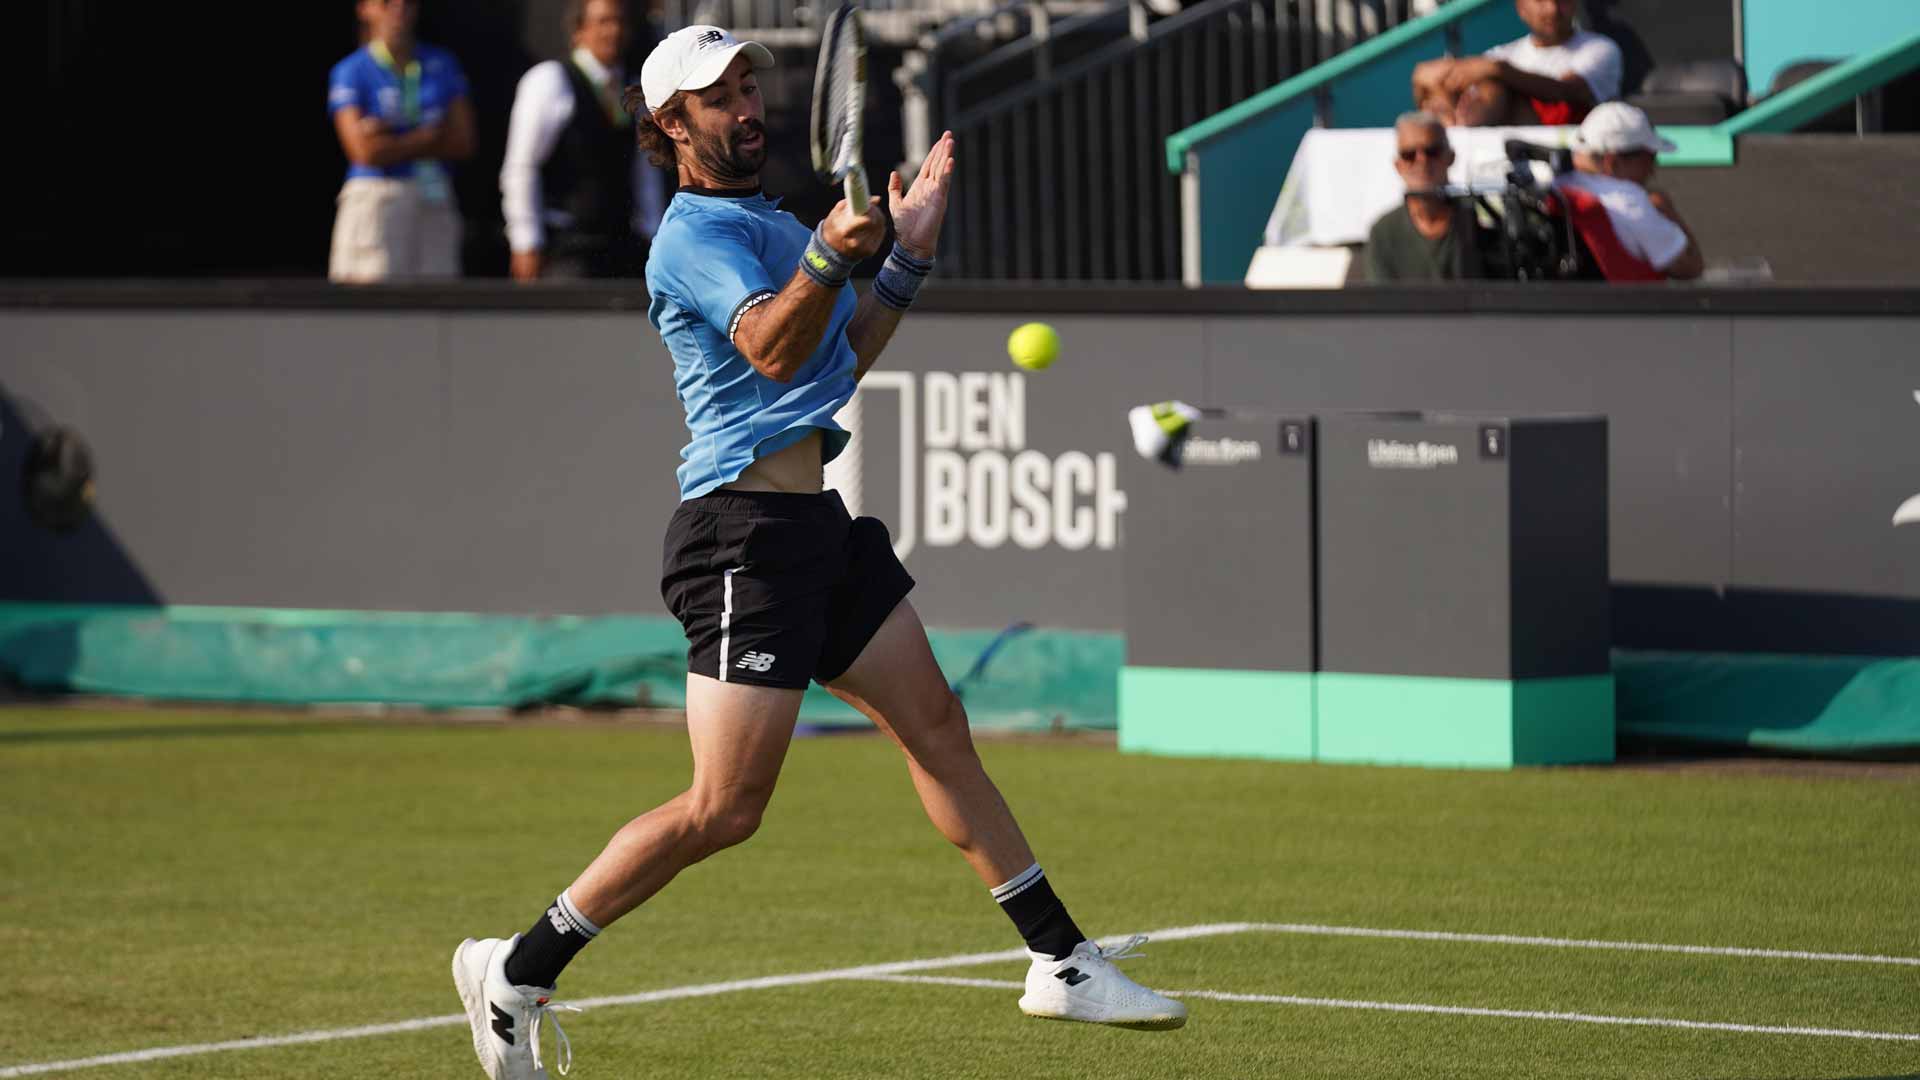 Thompson to vie for first ATP title in s-Hertogenbosch 17 June, 2023 All News News and Features News and Events Tennis Australia